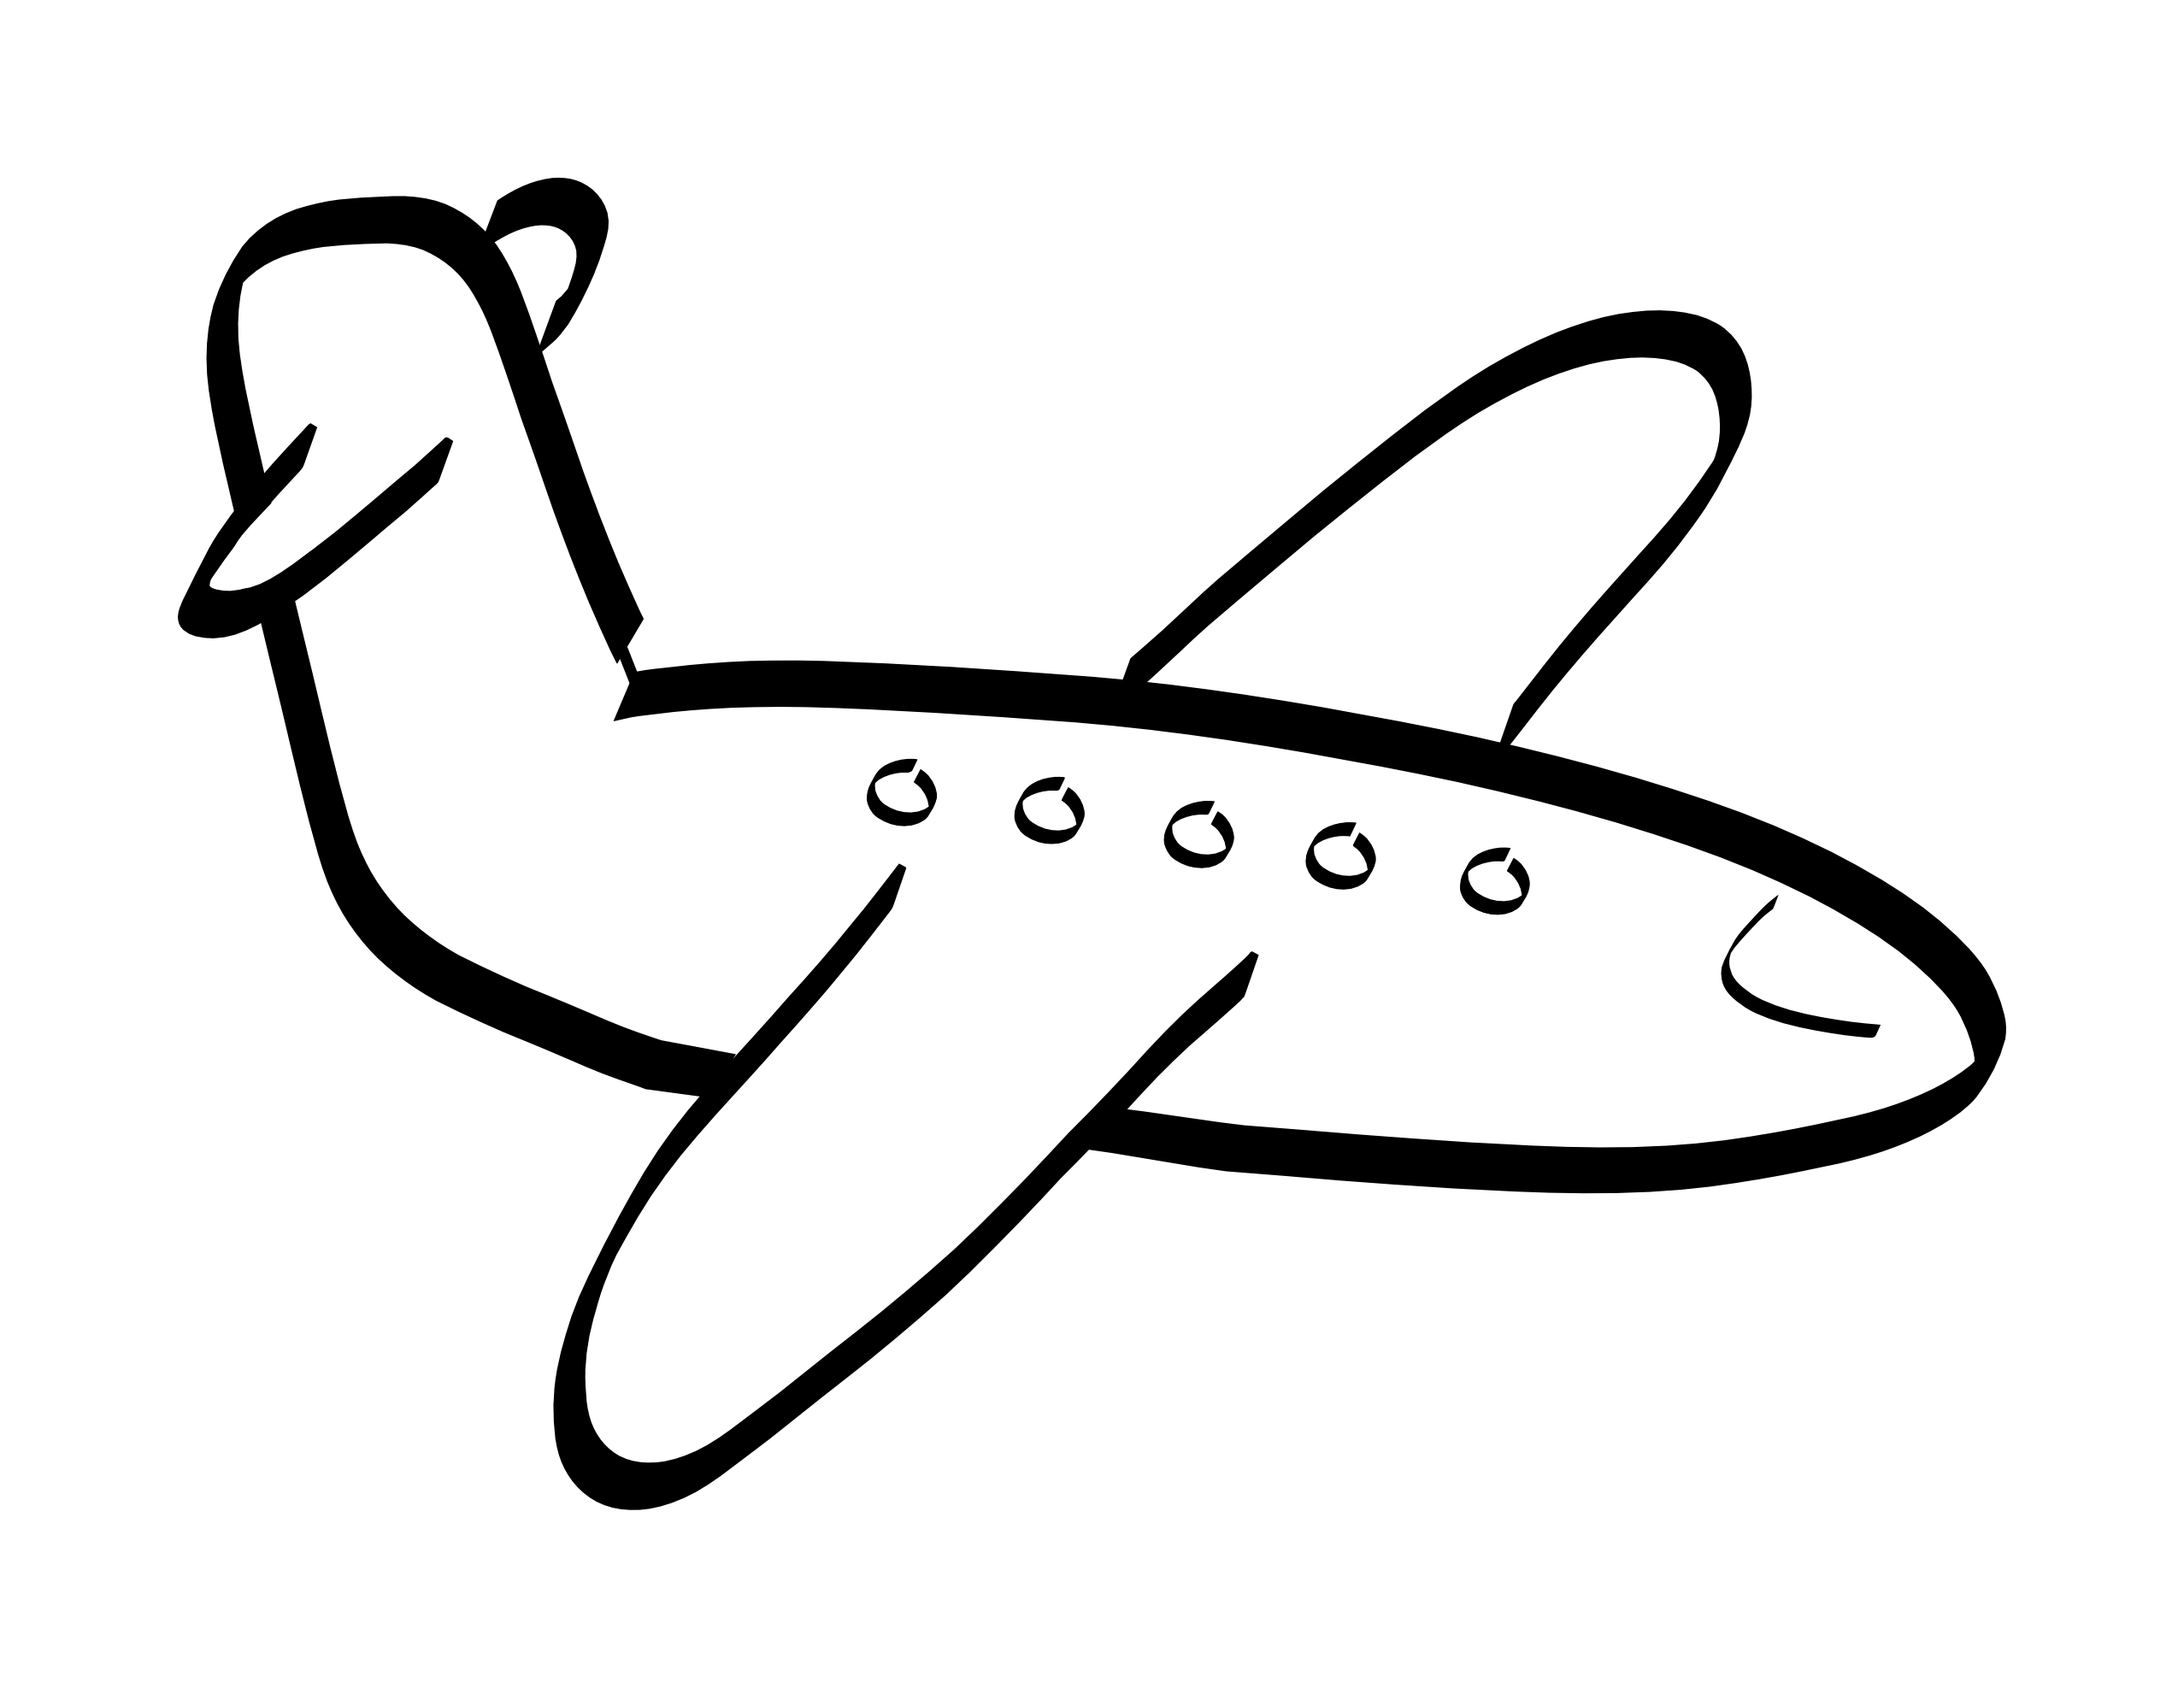 Airplane Line Art Cliparts.co